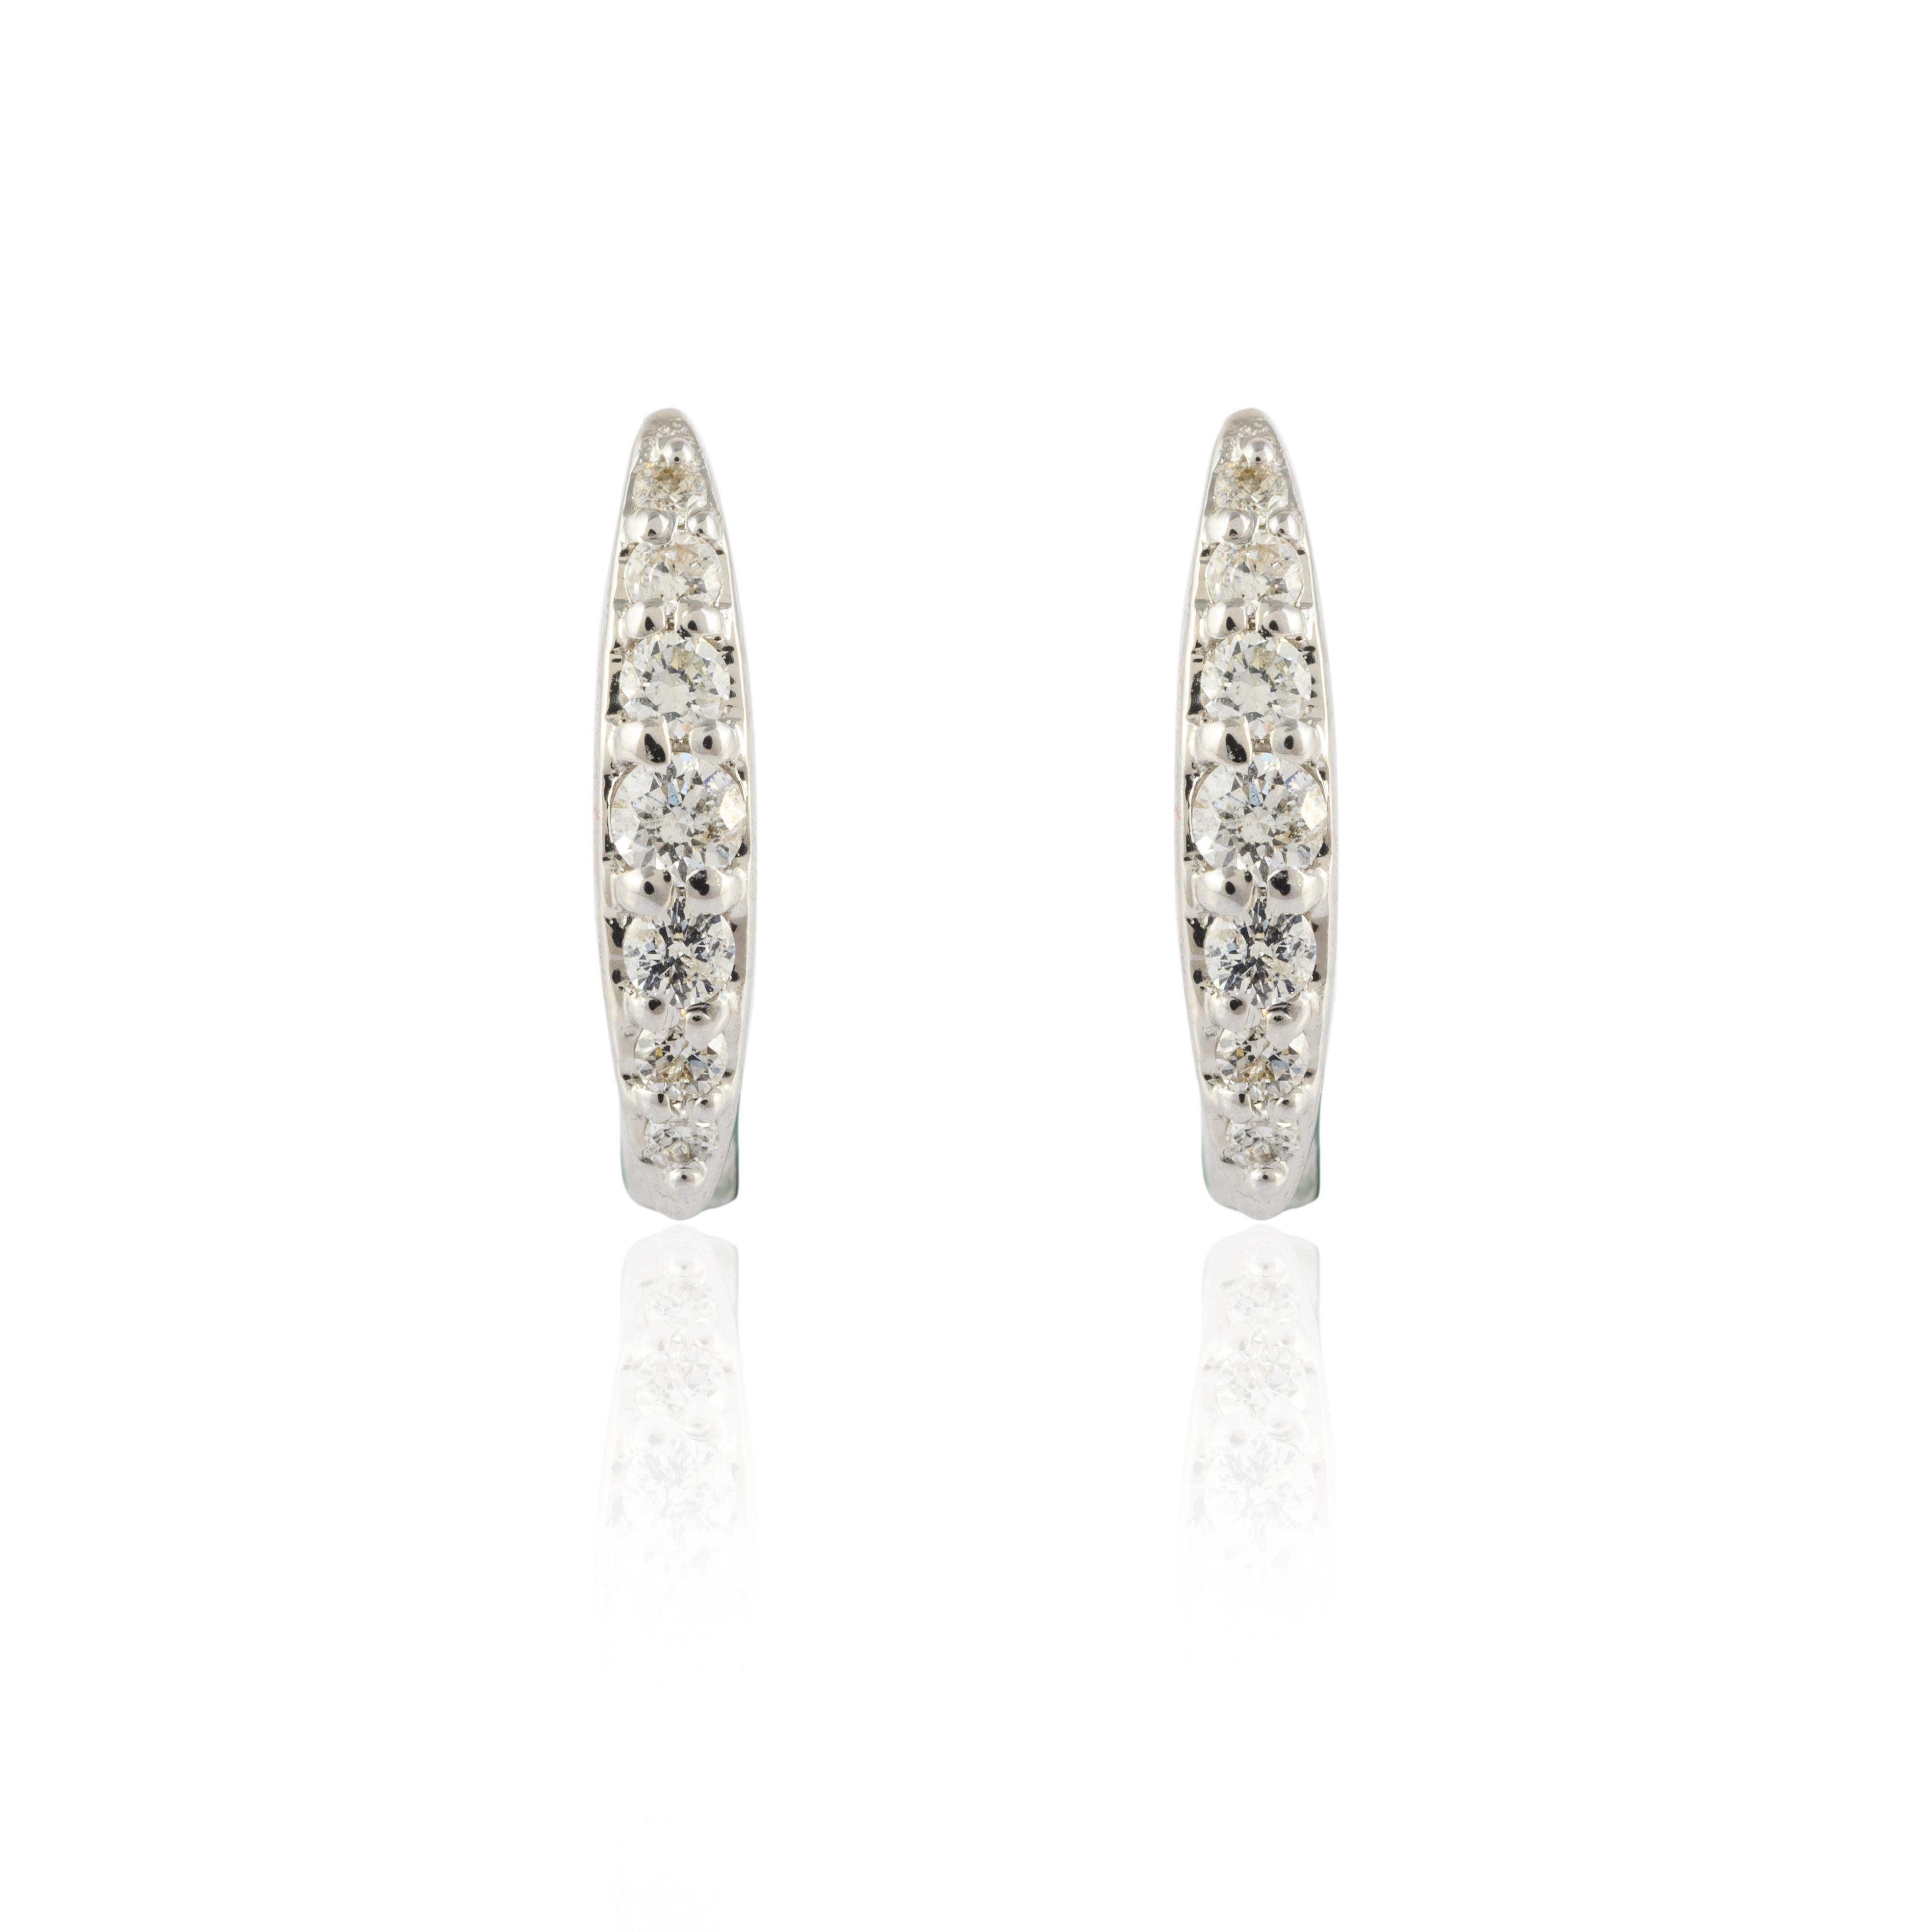 Dainty Diamond Huggie Earrings in 18K Gold to make a statement with your look. You shall need huggie earrings to make a statement with your look. These earrings create a sparkling, luxurious look featuring round cut diamonds.
April birthstone